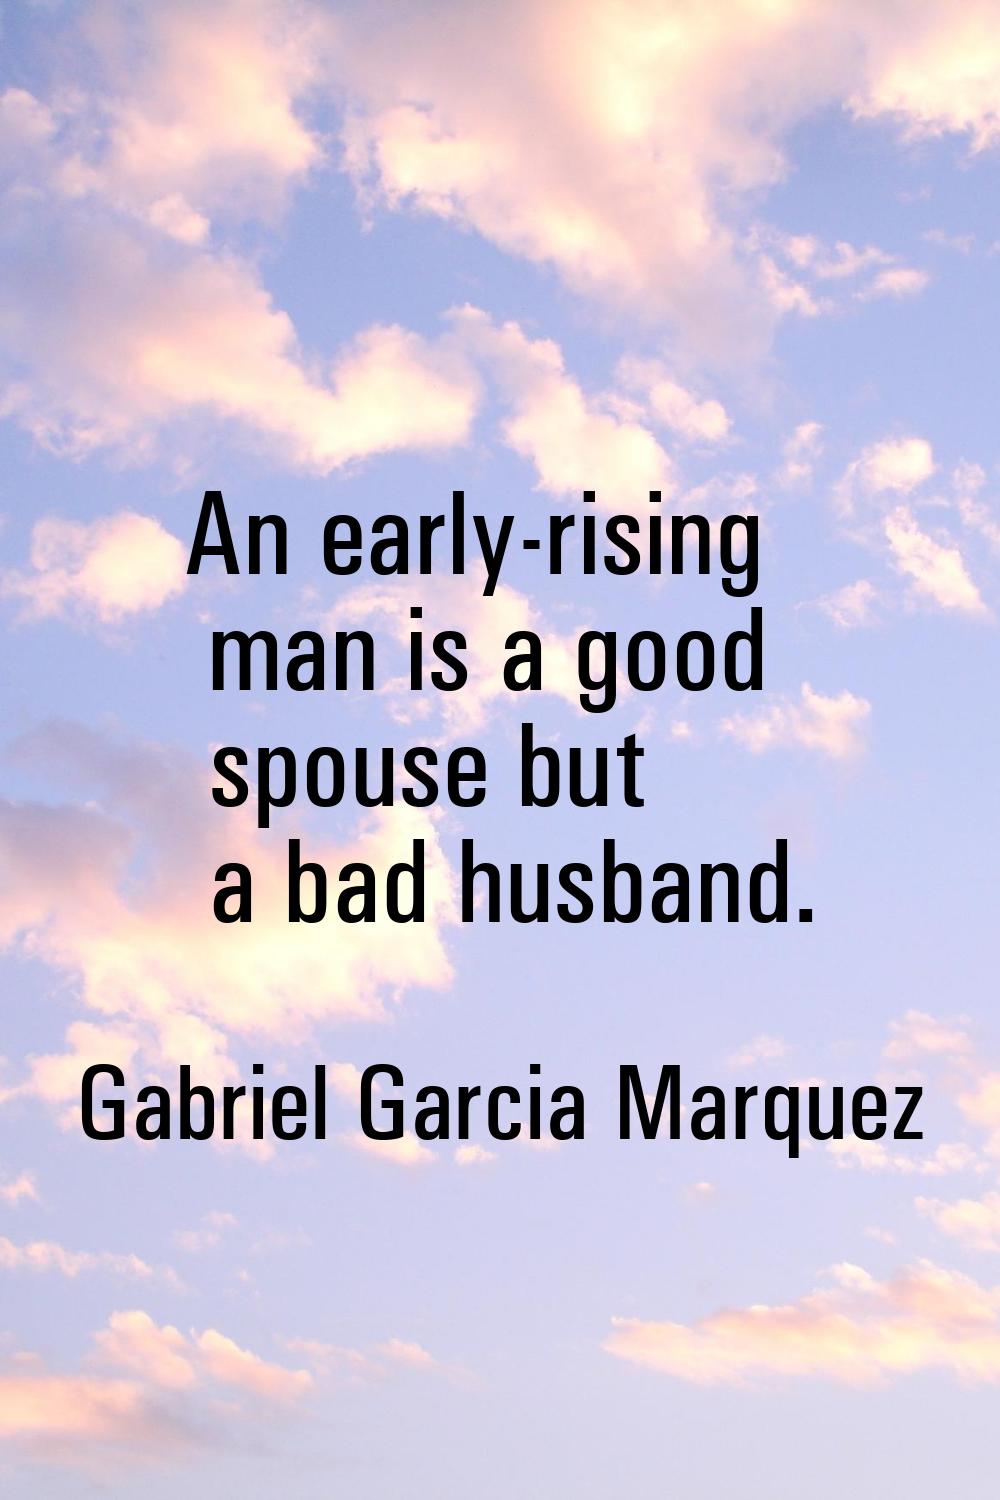 An early-rising man is a good spouse but a bad husband.